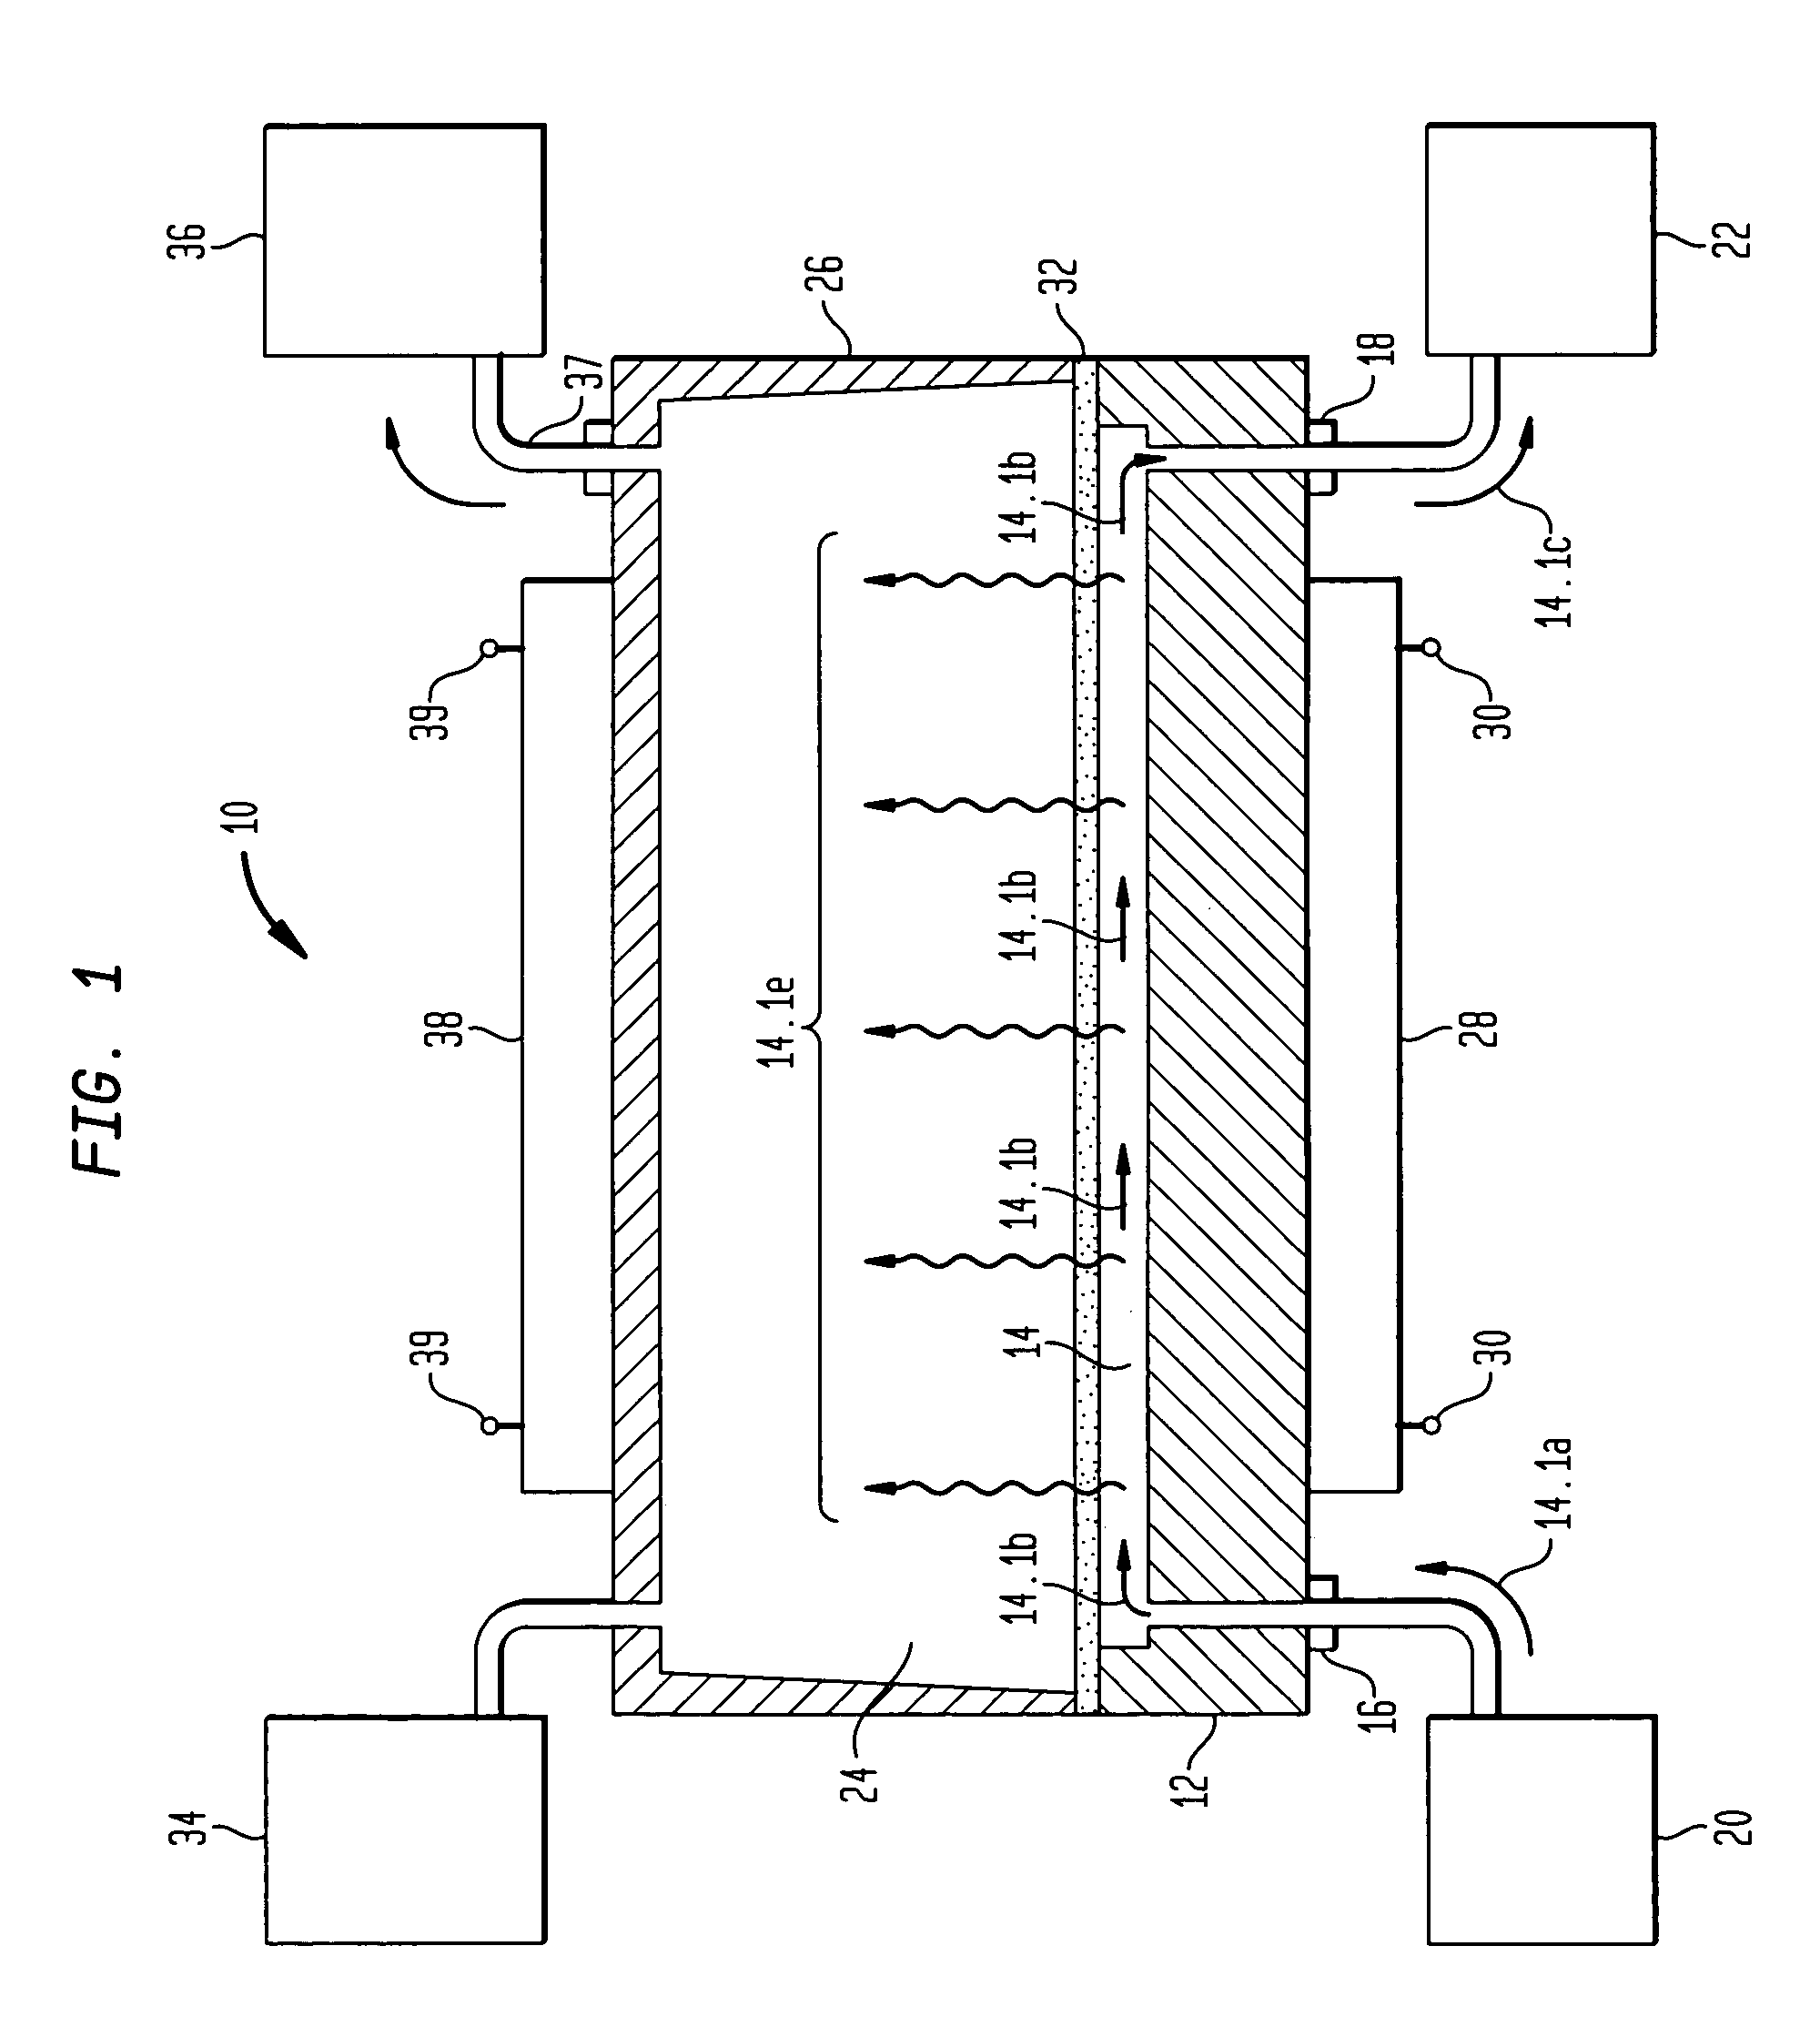 Micro-channel chemical concentrator